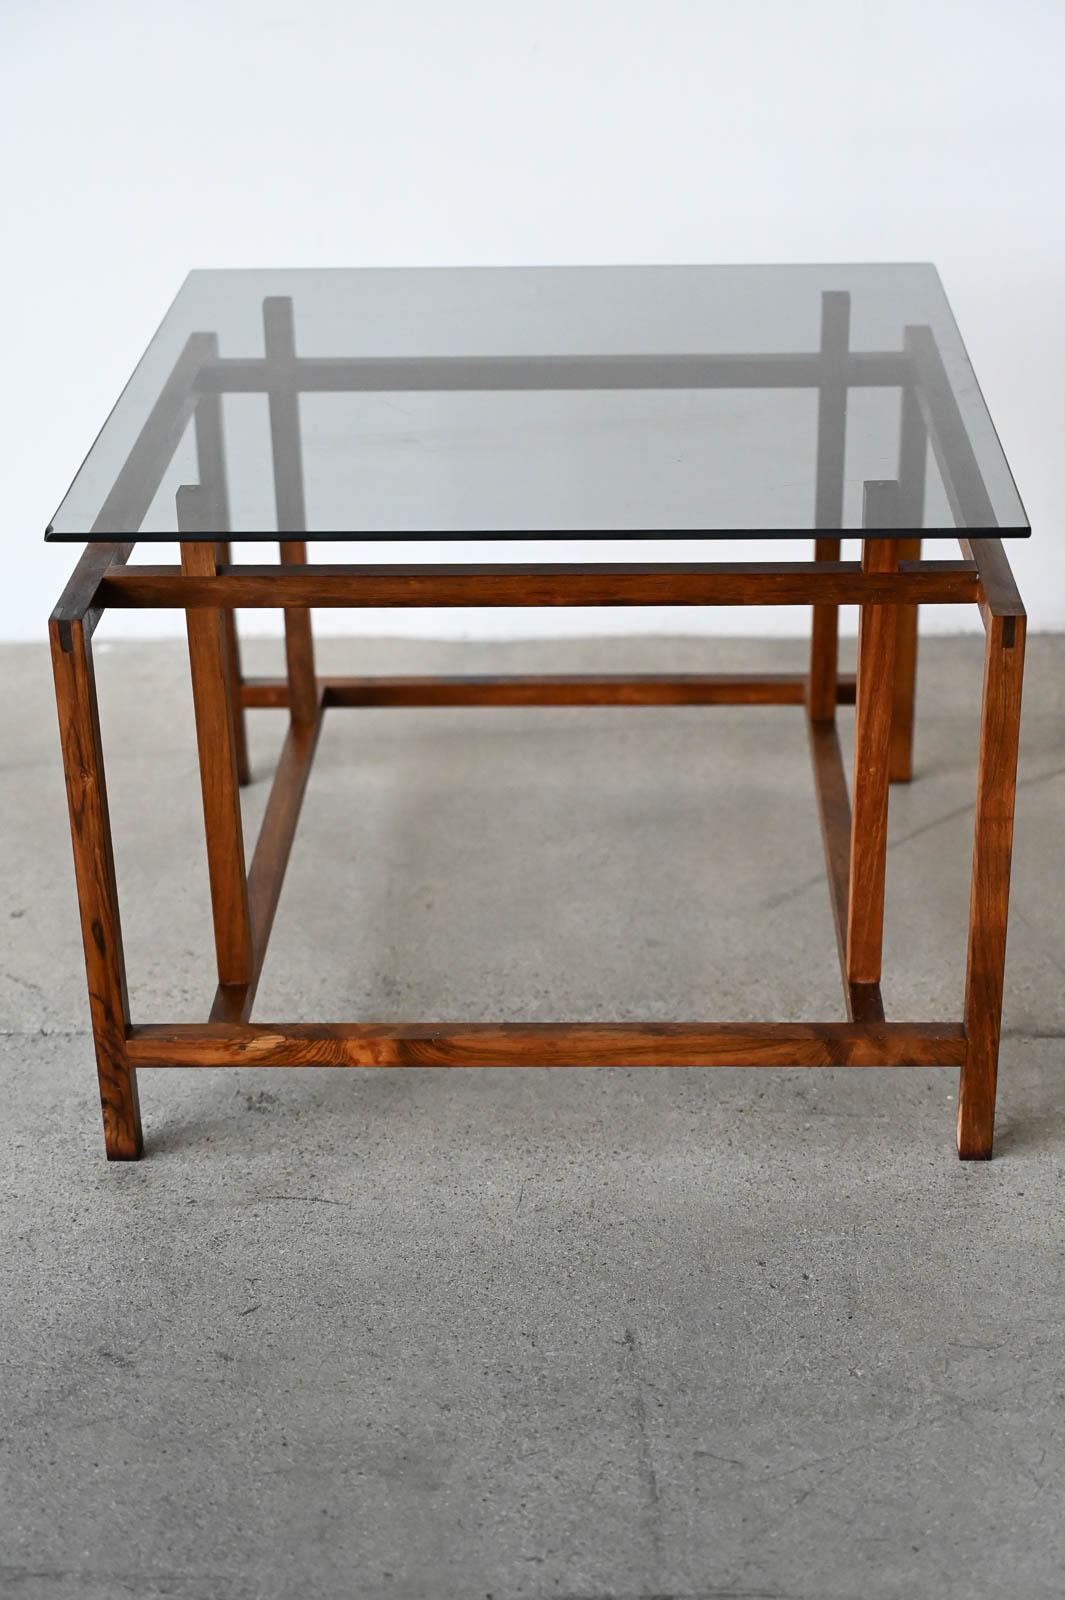 Henning Norgaard for Komfort Rosewood and Smoked Glass Side Table, ca. 1960.  Small rosewood and smoked glass square side table with floating glass top on a delicate rosewood base.  

Measures 19.5